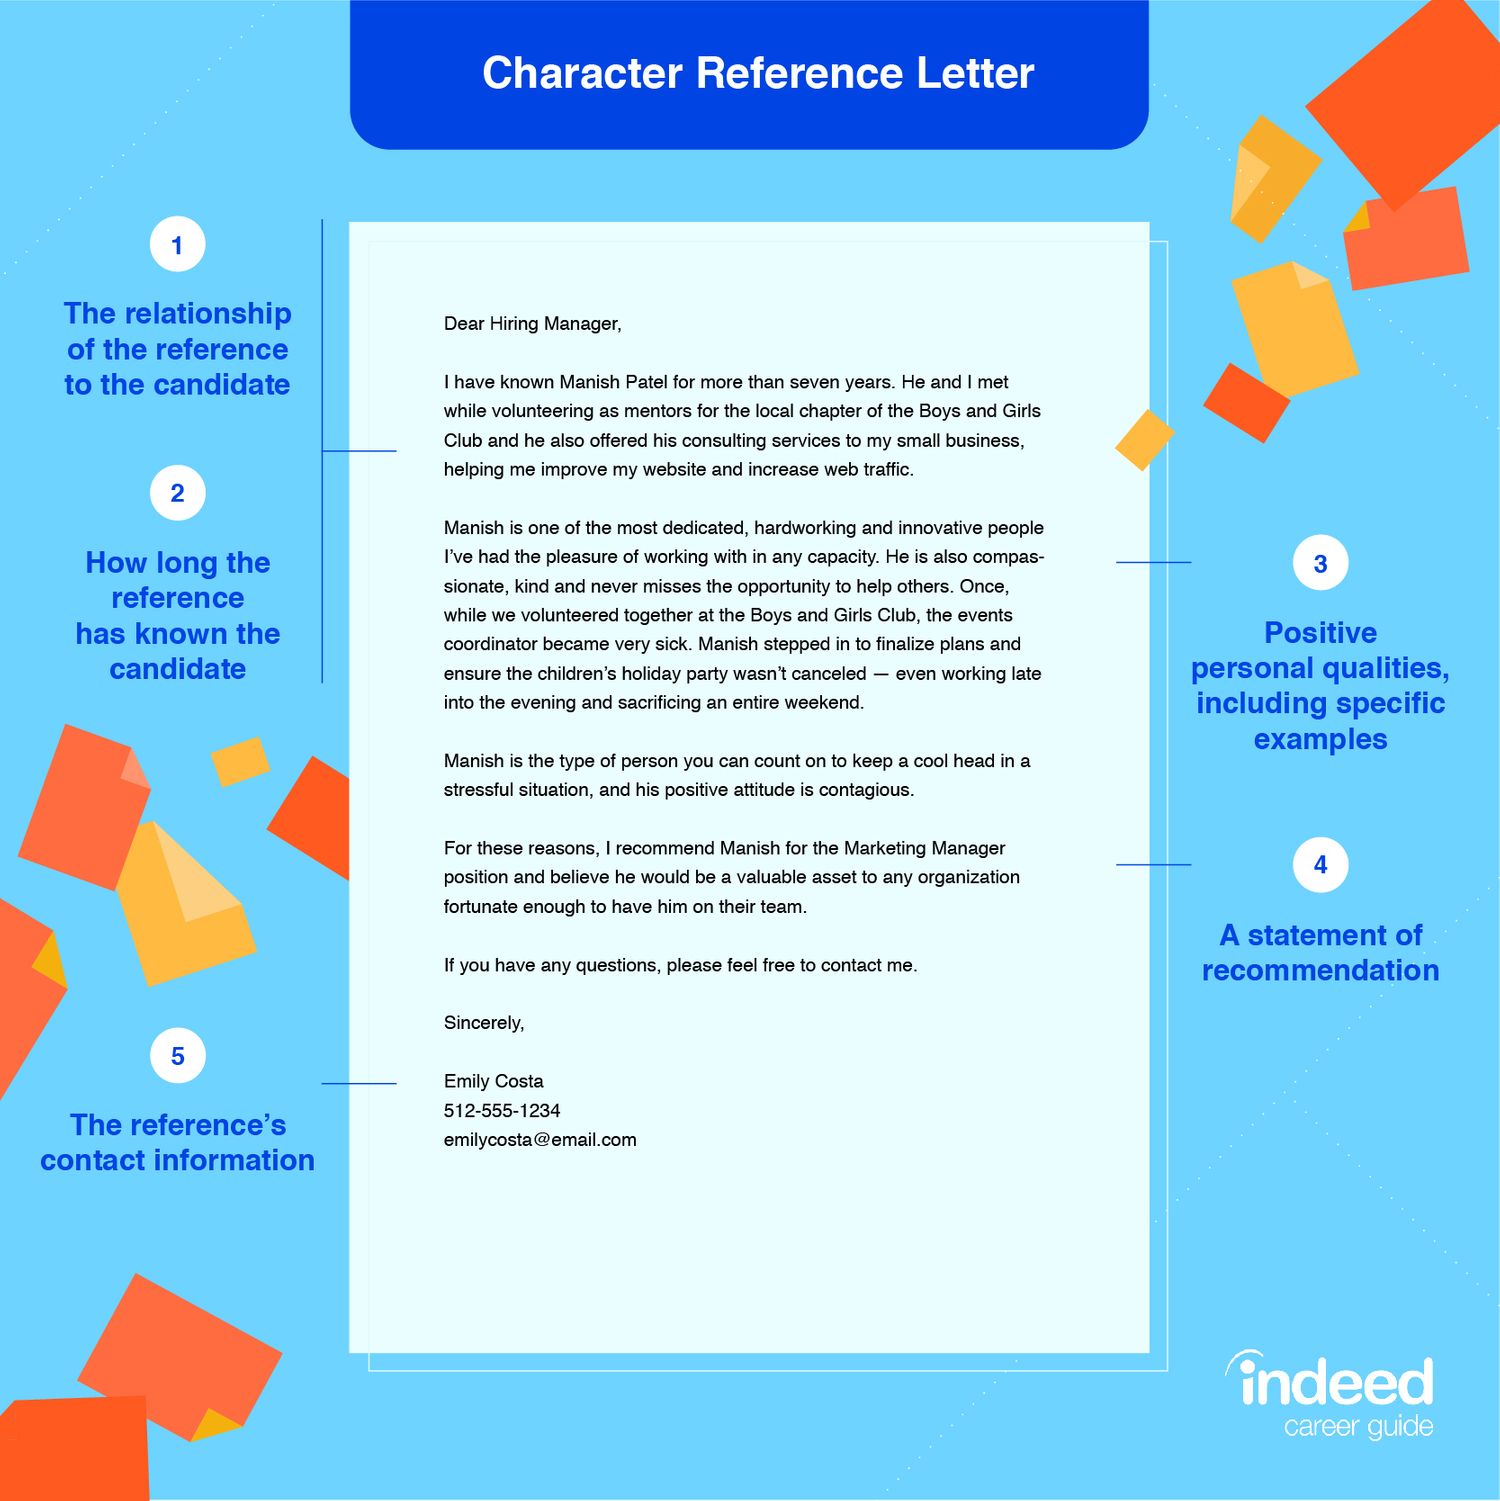 Character Reference Letter Sample and Tips  Indeed.com